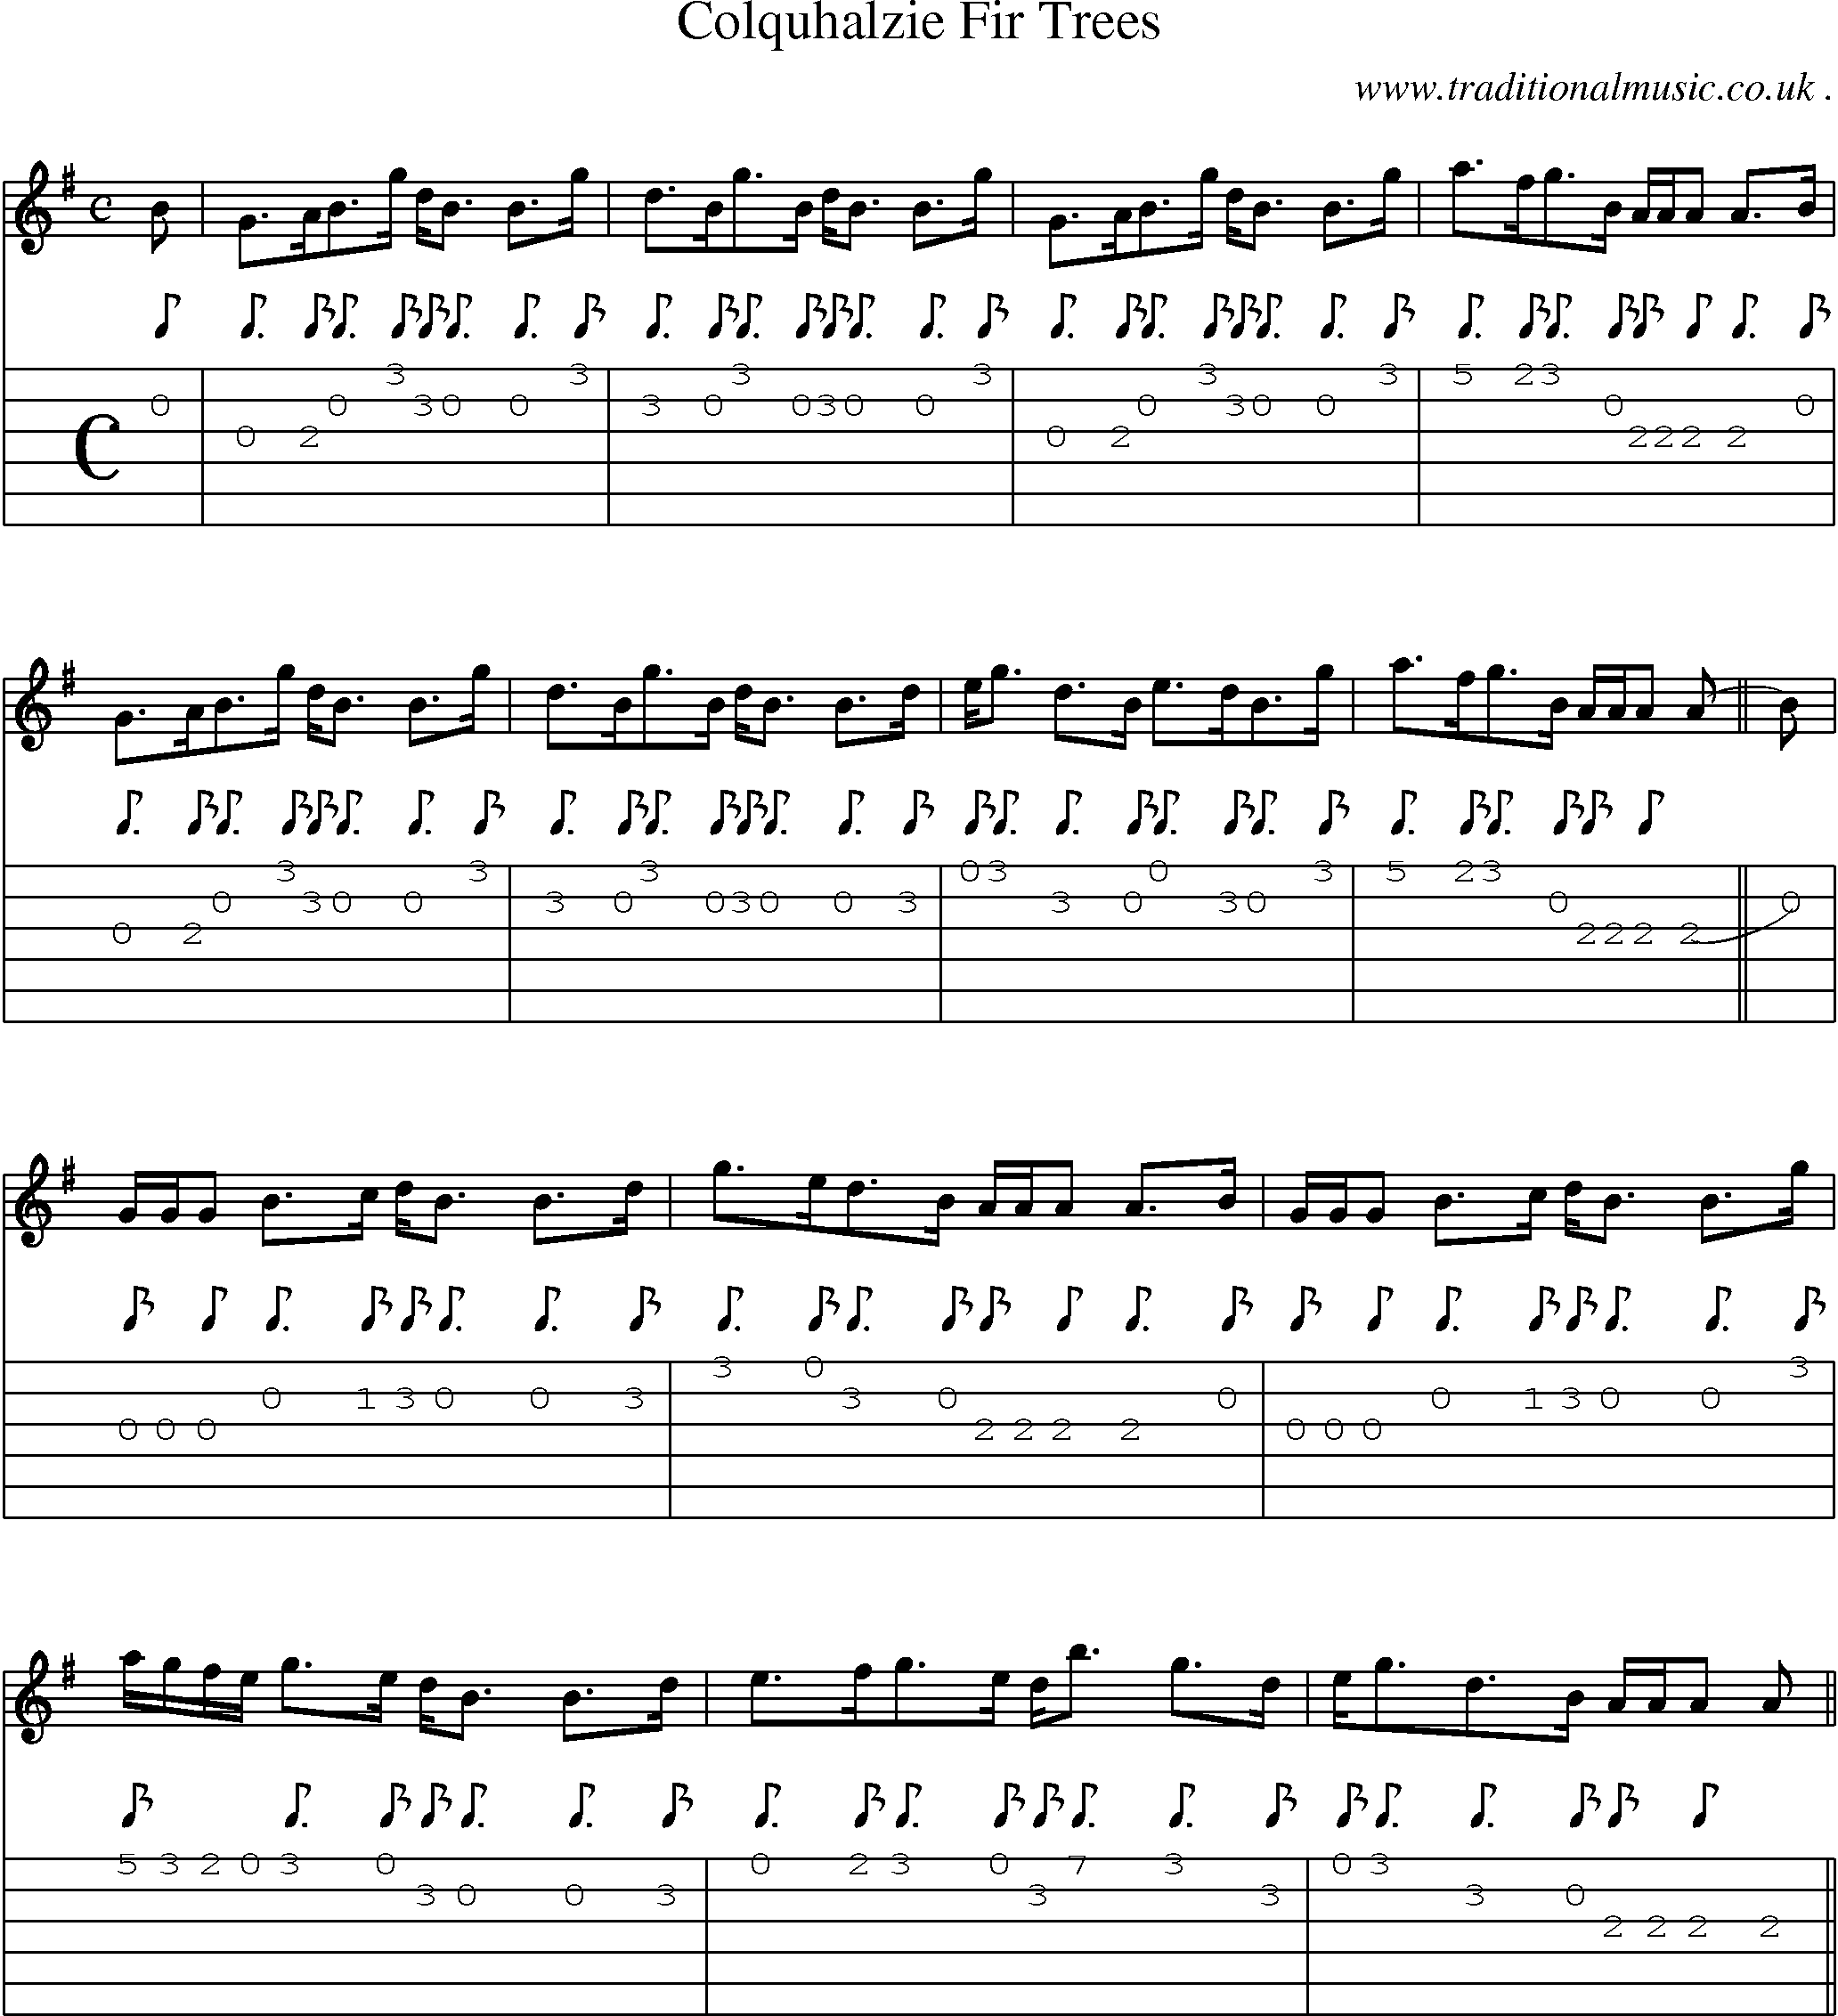 Sheet-music  score, Chords and Guitar Tabs for Colquhalzie Fir Trees